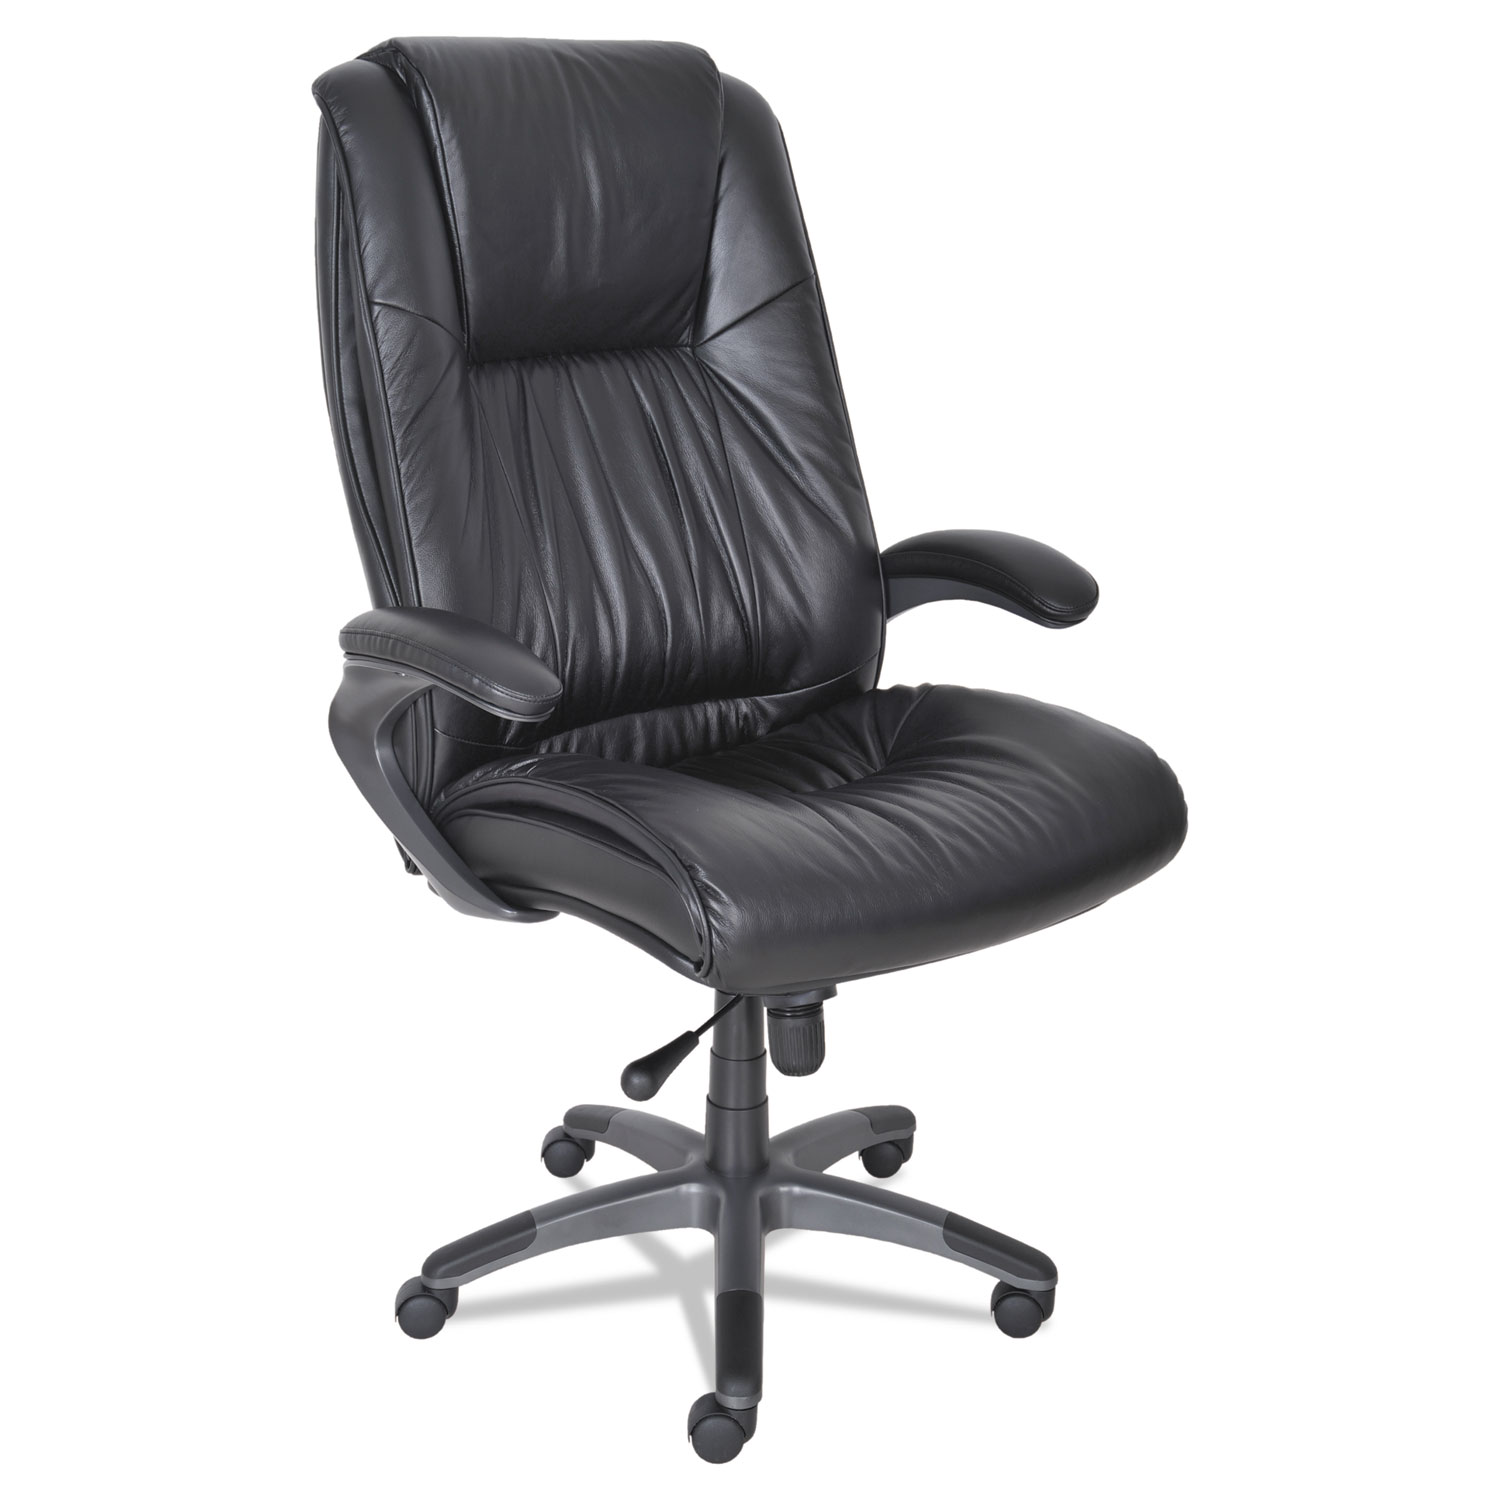 Leather Seating Series High-Back Swivel/Tilt Chair, Black Leather